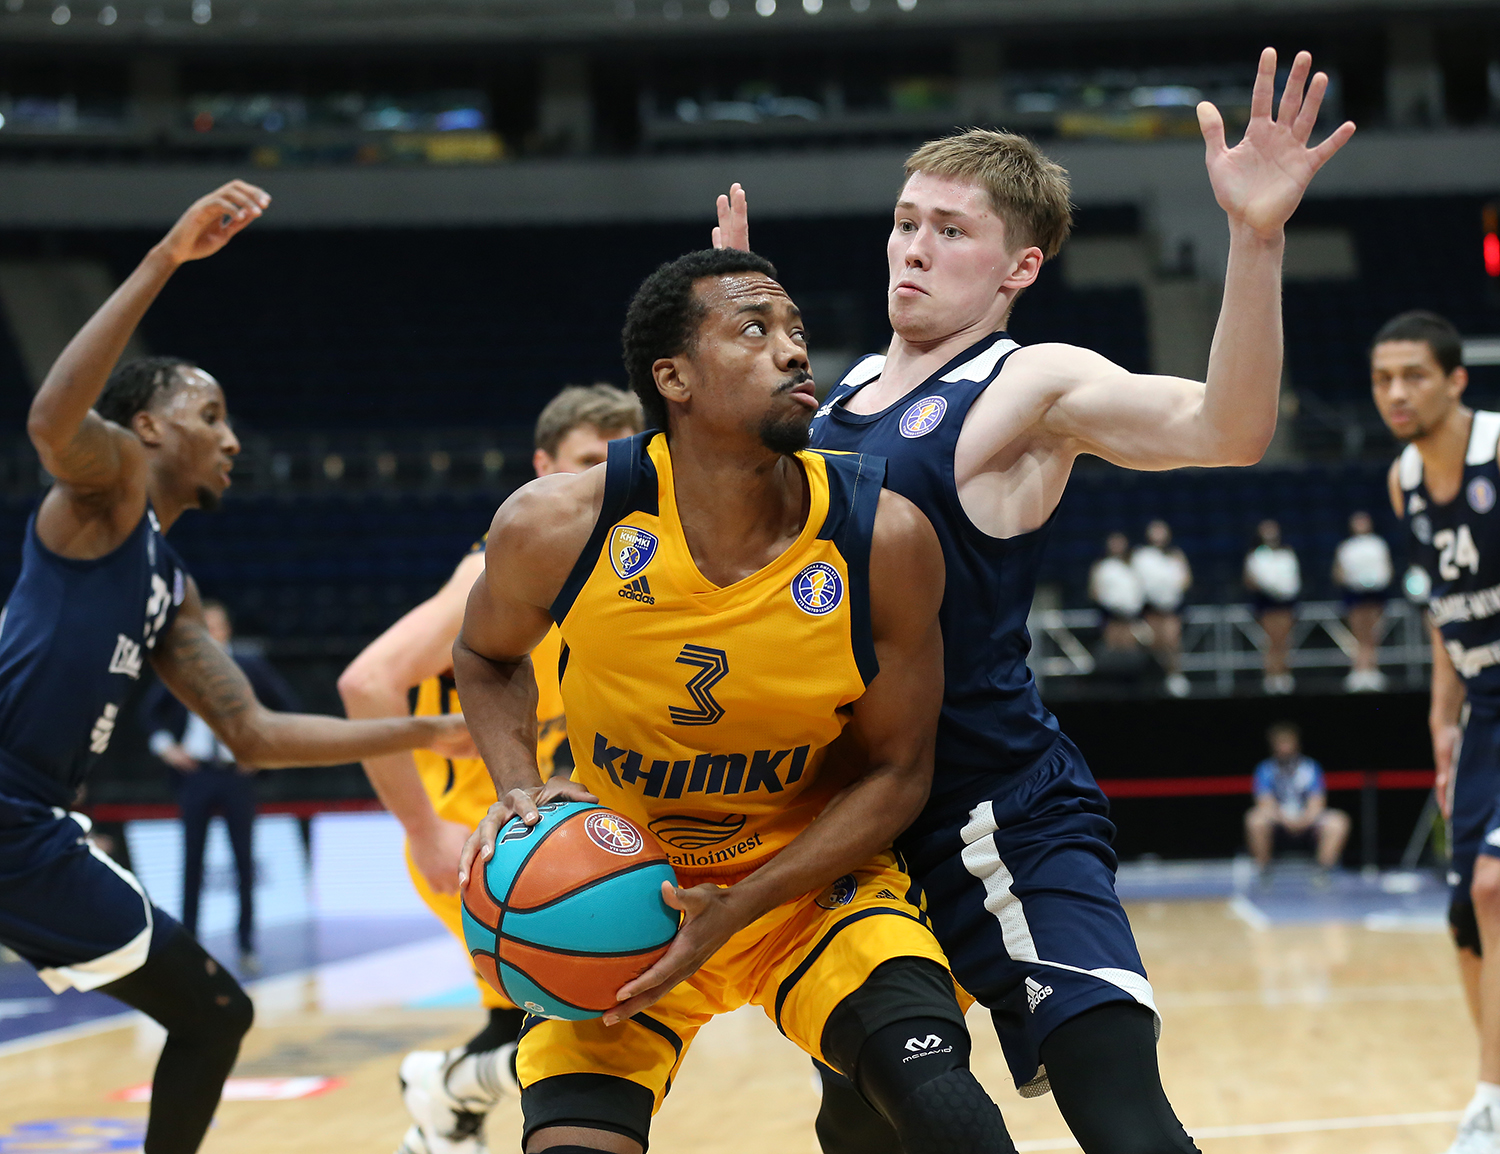 Khimki continue the chase after 6th place in Minsk